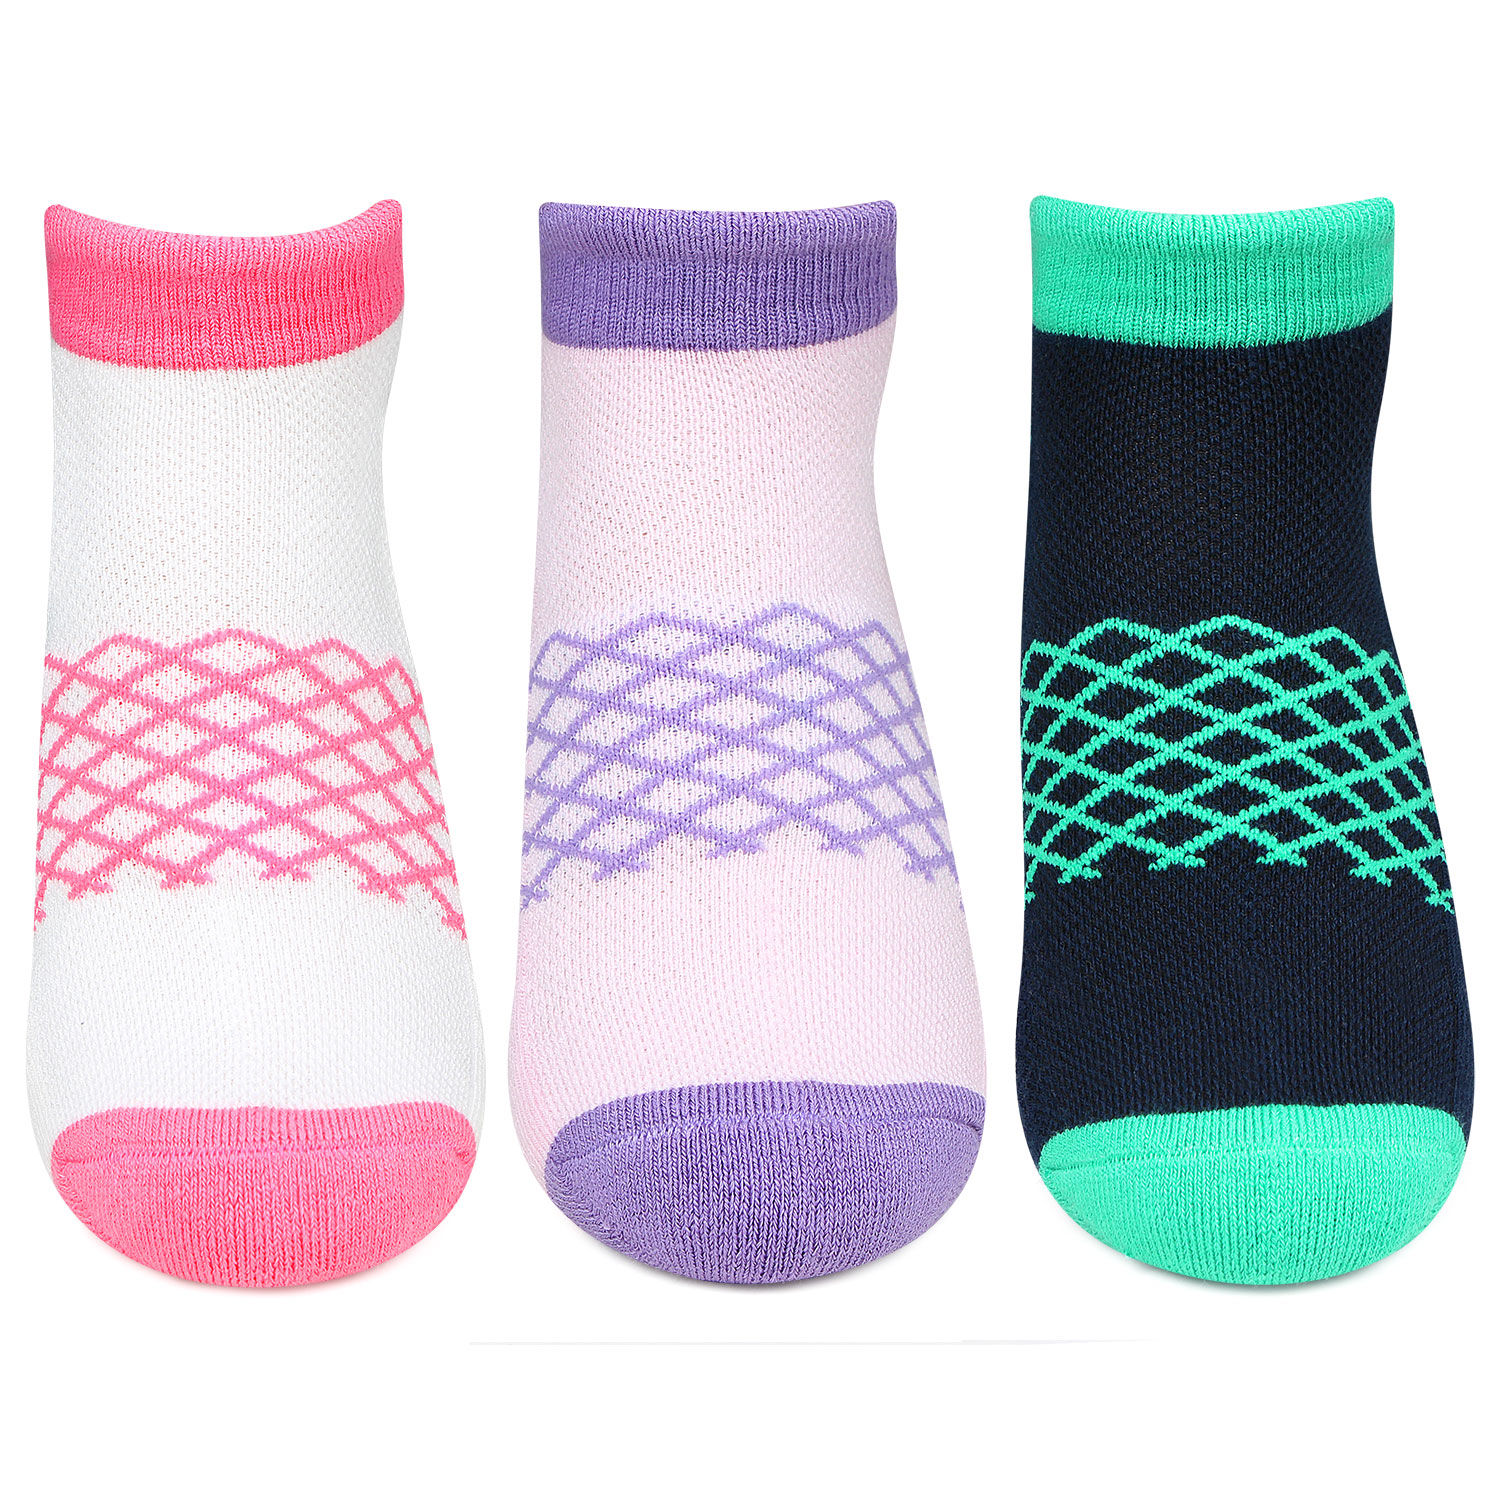 Bonjour Hush Puppies Women's Multicolor Cushioned Ankle Socks - Multi-Color (Free Size)